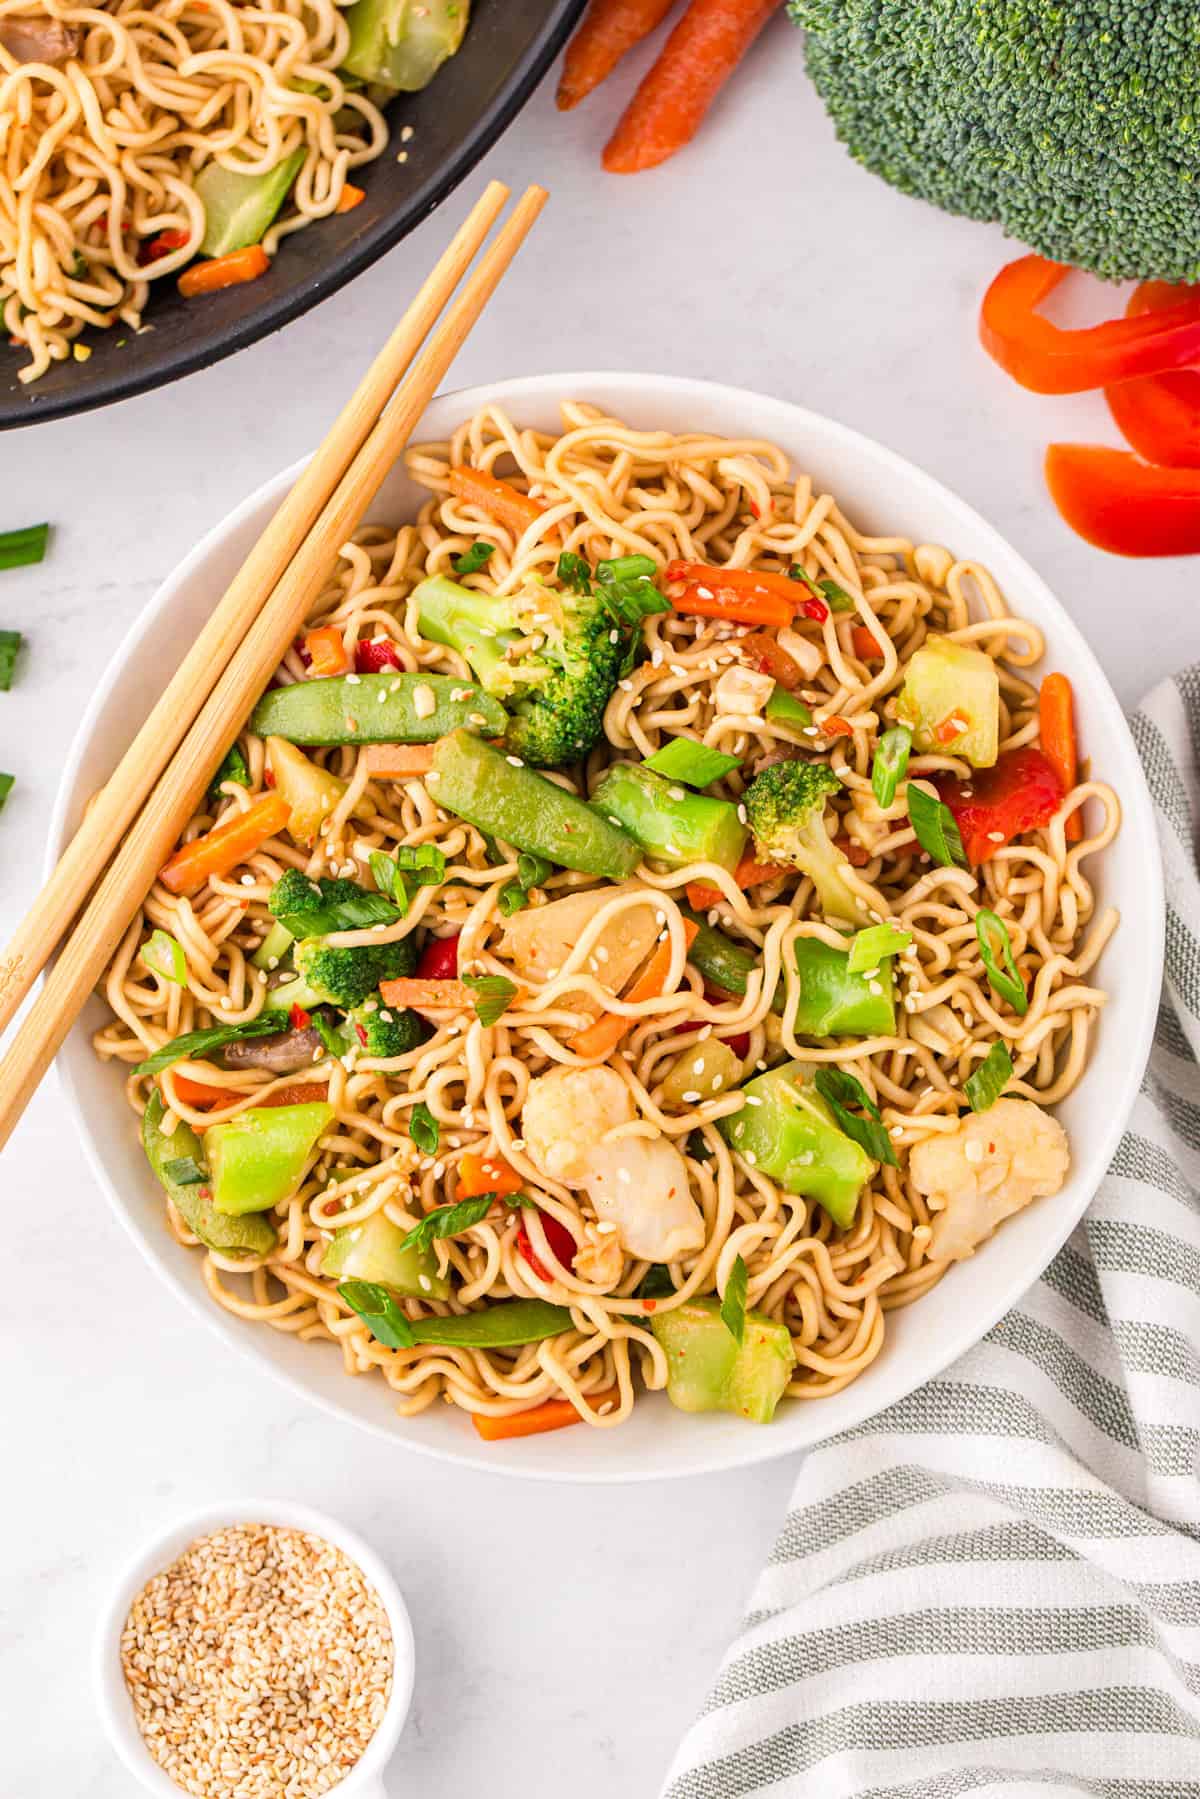 Ramen stir fry with broccoli, snap peas, carrots, bell peppers, cauliflower, mushrooms, sesame seeds, and green onions served in a large bowl with chop sticks.